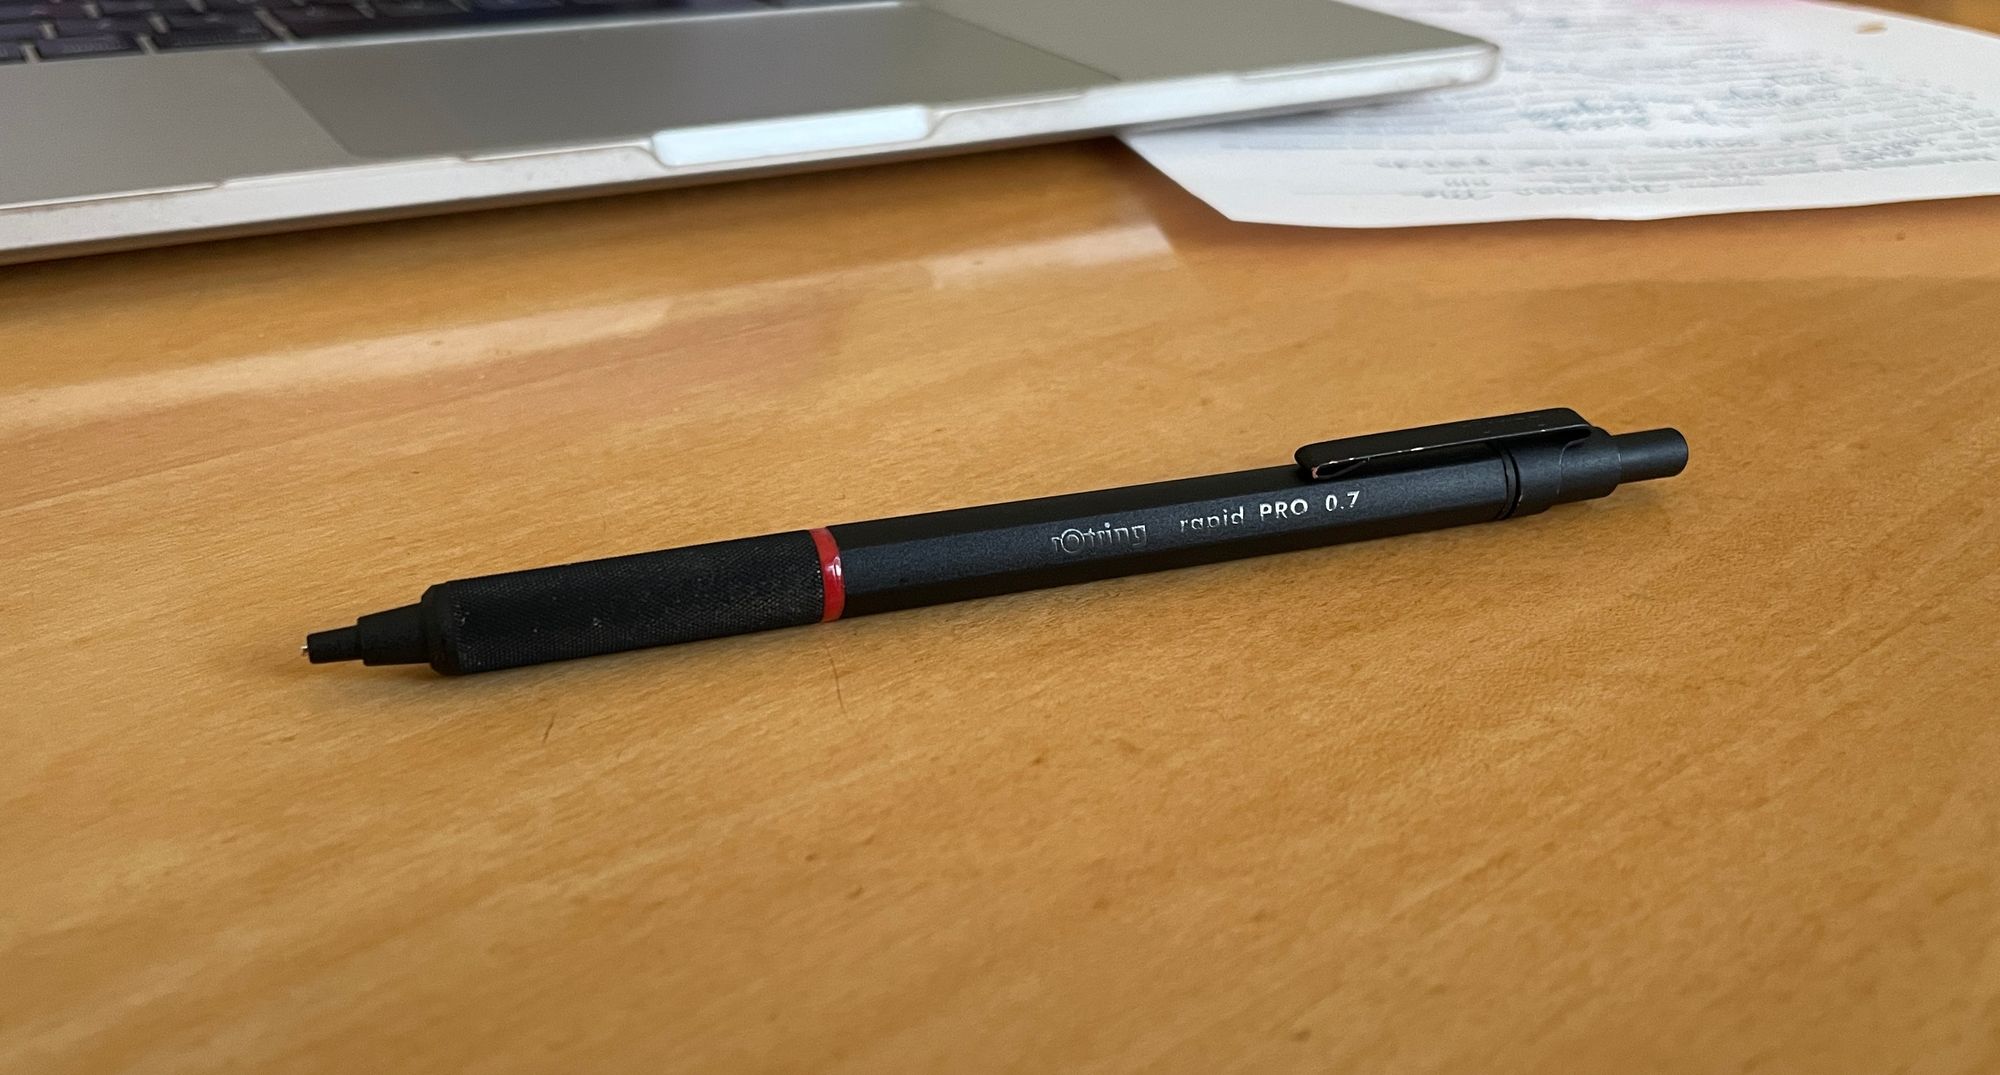 Review: Rotring Mechanical Pencils; Tikki, 300, 500, 600, 800, and